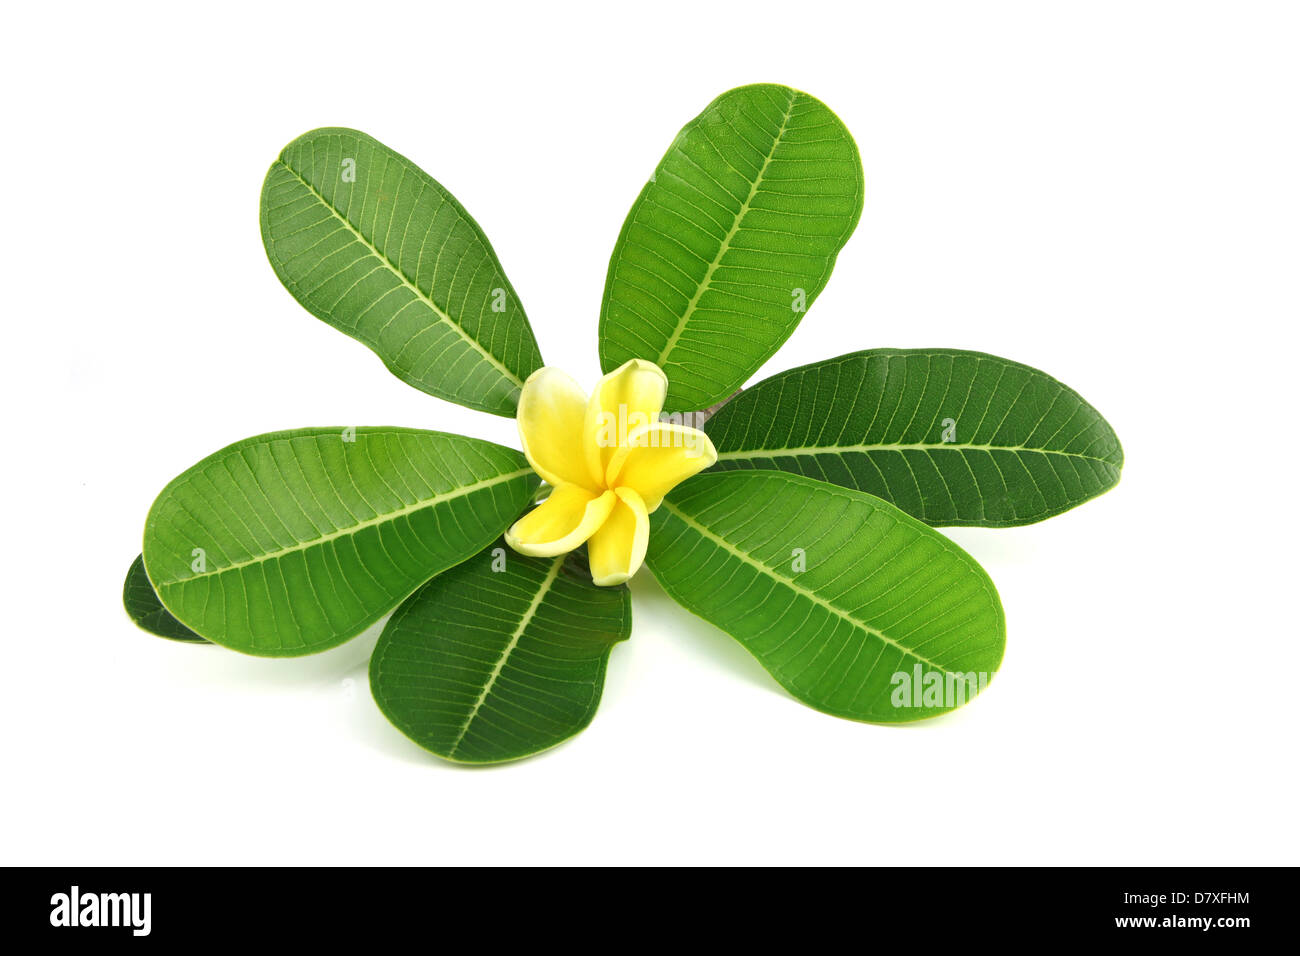 The yellow flower and green leaf on the white background. Stock Photo